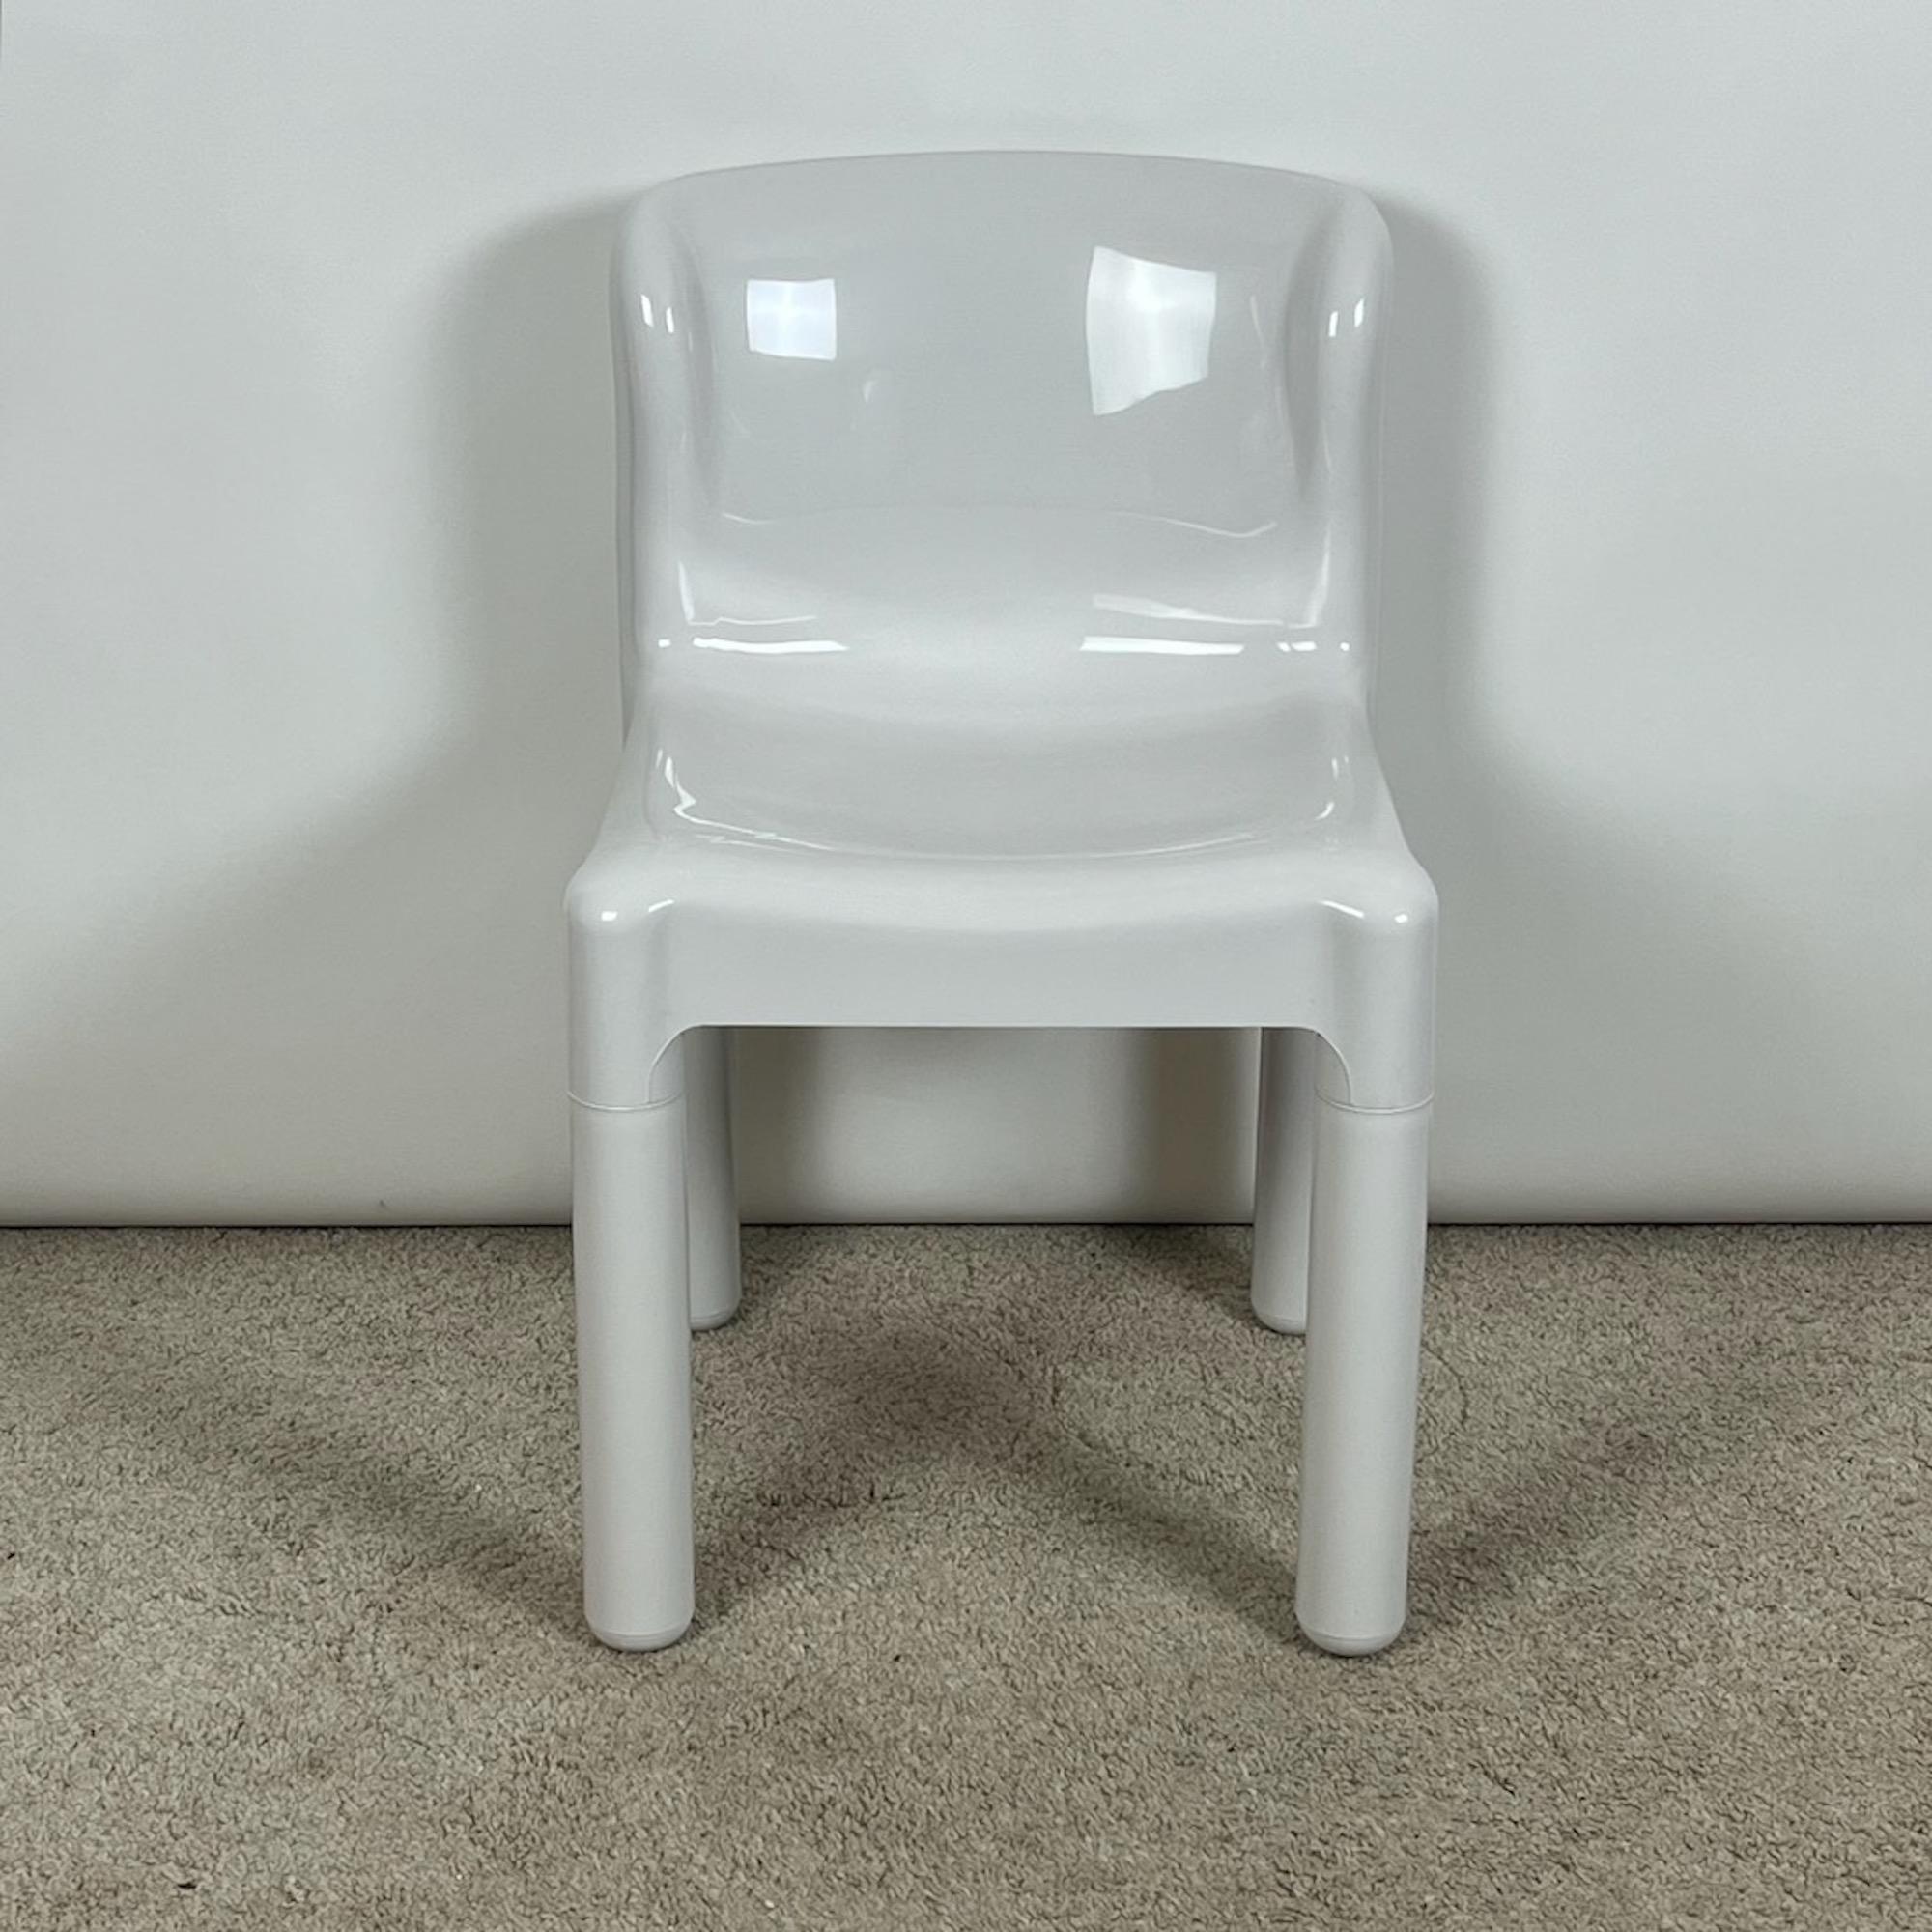 Late 20th Century Kartell Chair Model 4875 by Carlo Bartoli - Glossy White - Italy, 1970s For Sale